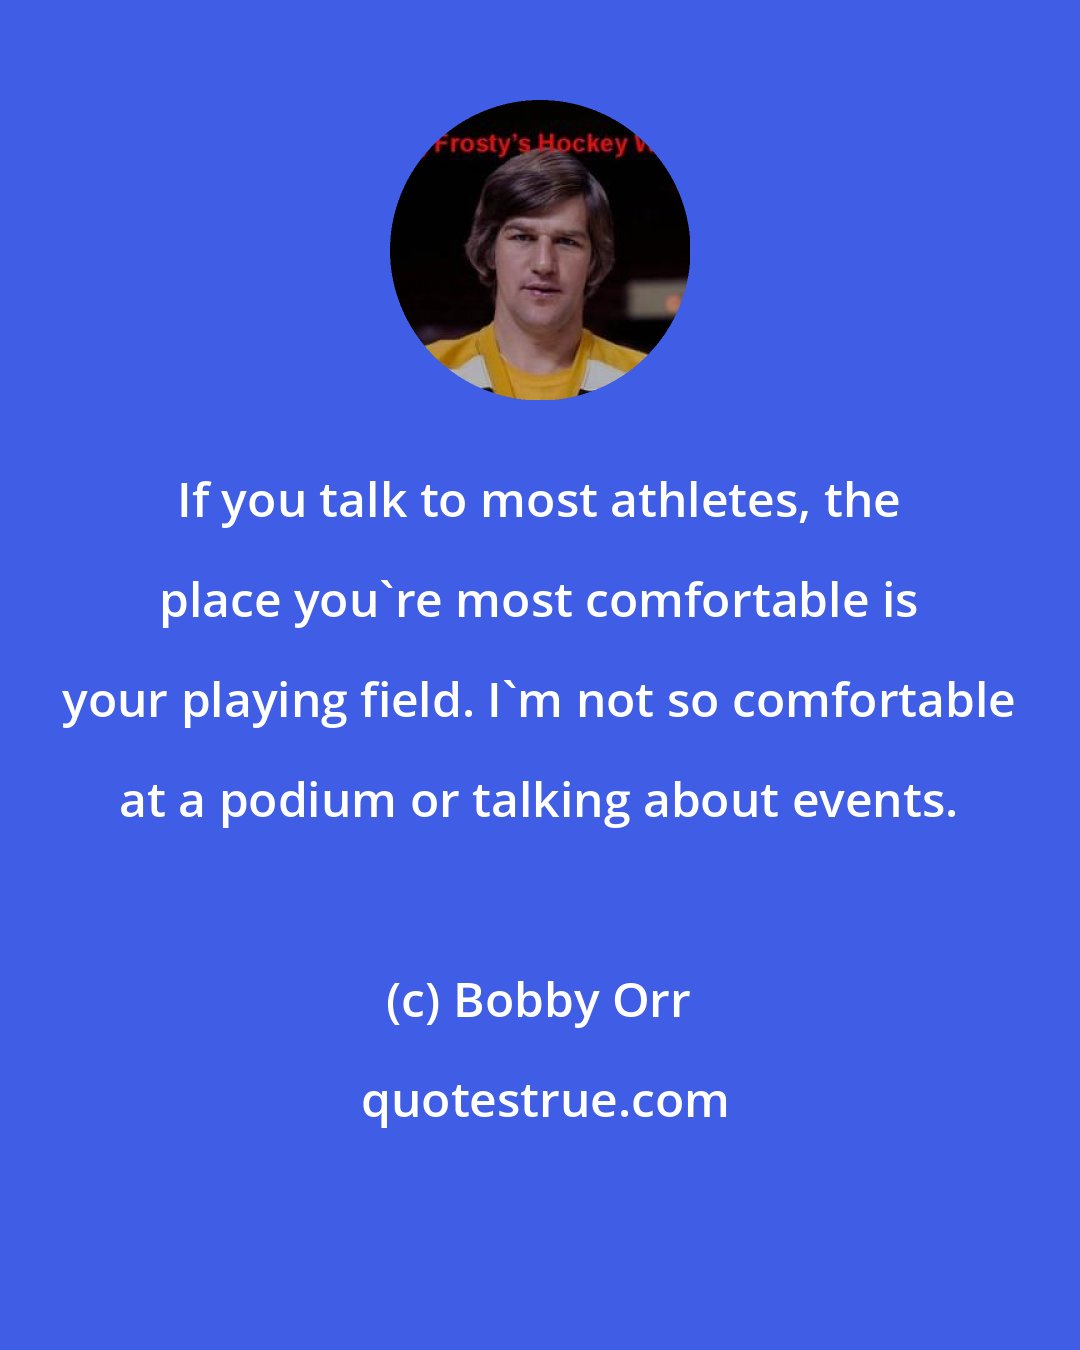 Bobby Orr: If you talk to most athletes, the place you're most comfortable is your playing field. I'm not so comfortable at a podium or talking about events.